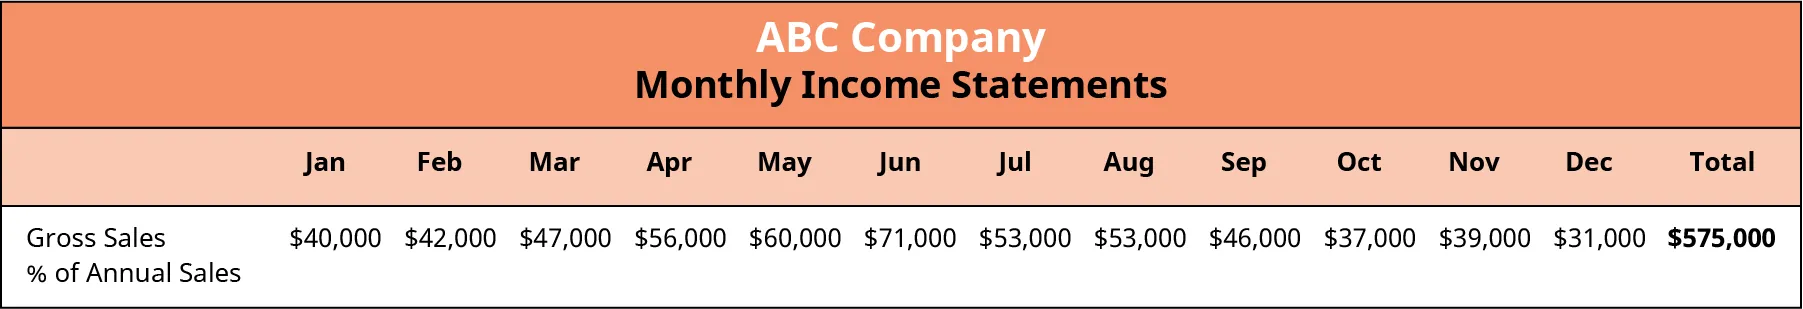 The monthly income statement of ABC company shows gross sales by month: January - $40,000; February - $42,000; March - $47,000; April - $56,000; May - $60,000; June - $71,000; July - $53,000; August - $53,000; September - $46,000; October - $37,000; November - $39,000; and December - $31,000.  The total sales for the year is $575,000.